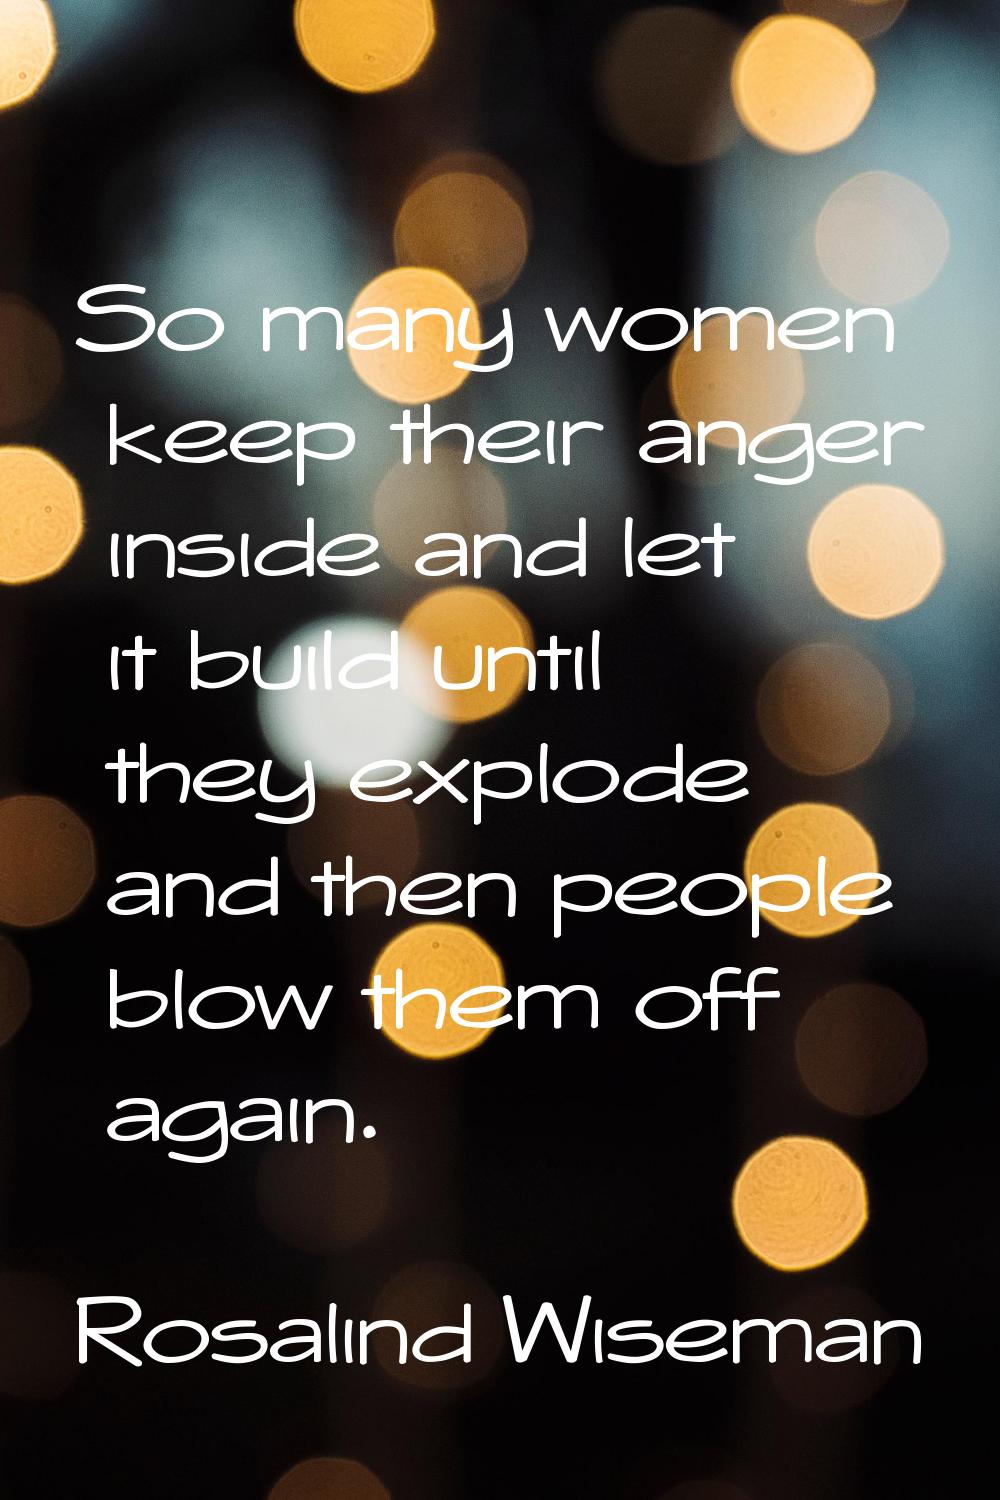 So many women keep their anger inside and let it build until they explode and then people blow them